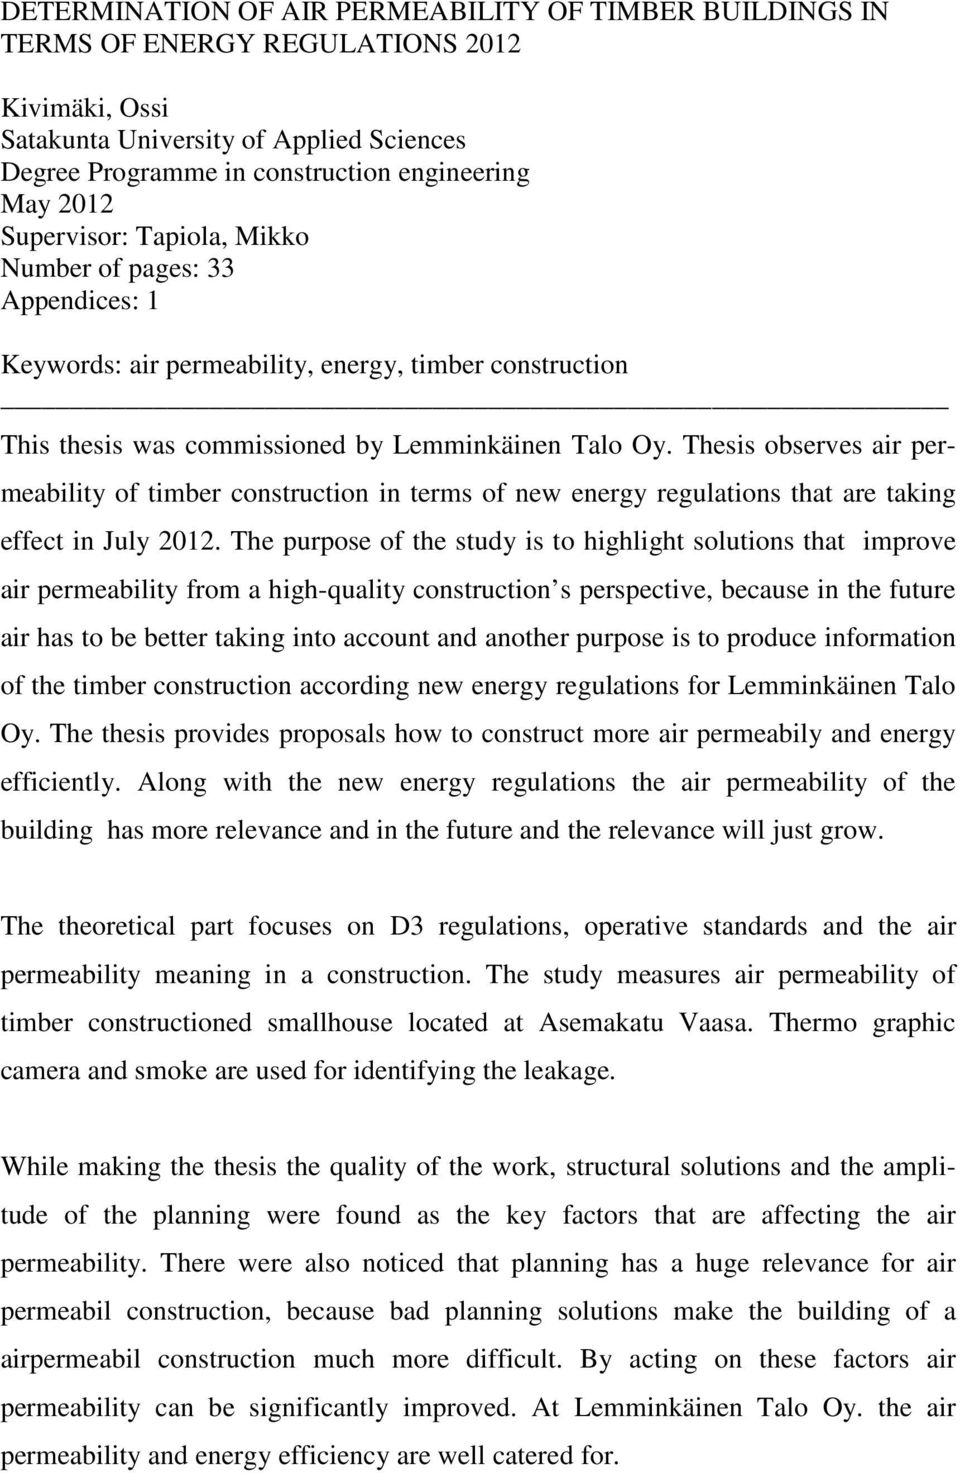 Thesis observes air permeability of timber construction in terms of new energy regulations that are taking effect in July 2012.